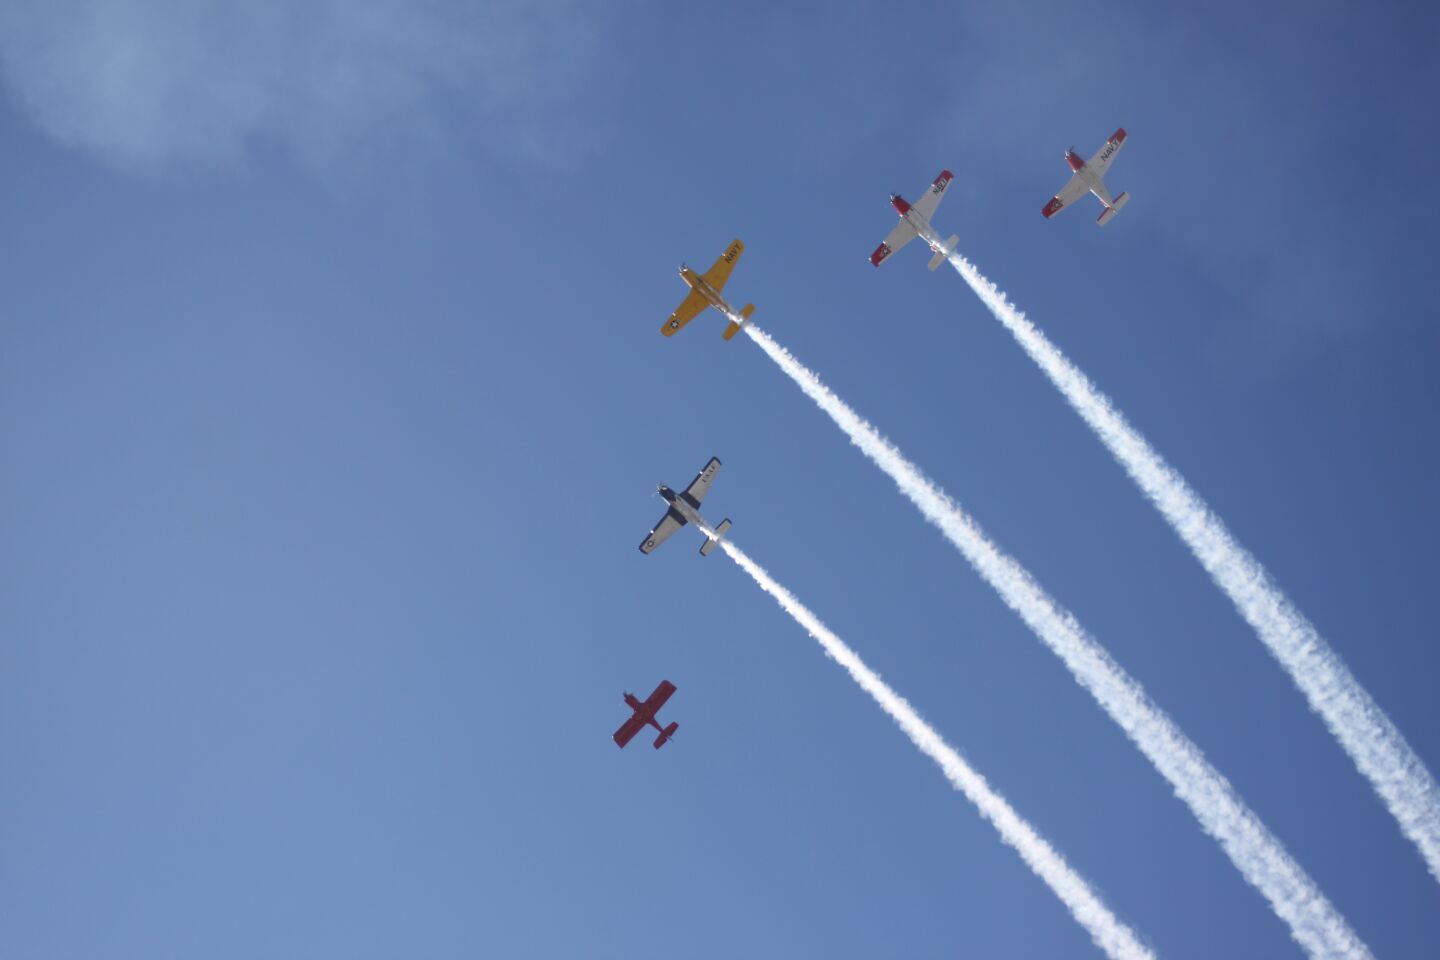 Antique airplanes fly over the La Jolla Christmas Parade to signal its start.